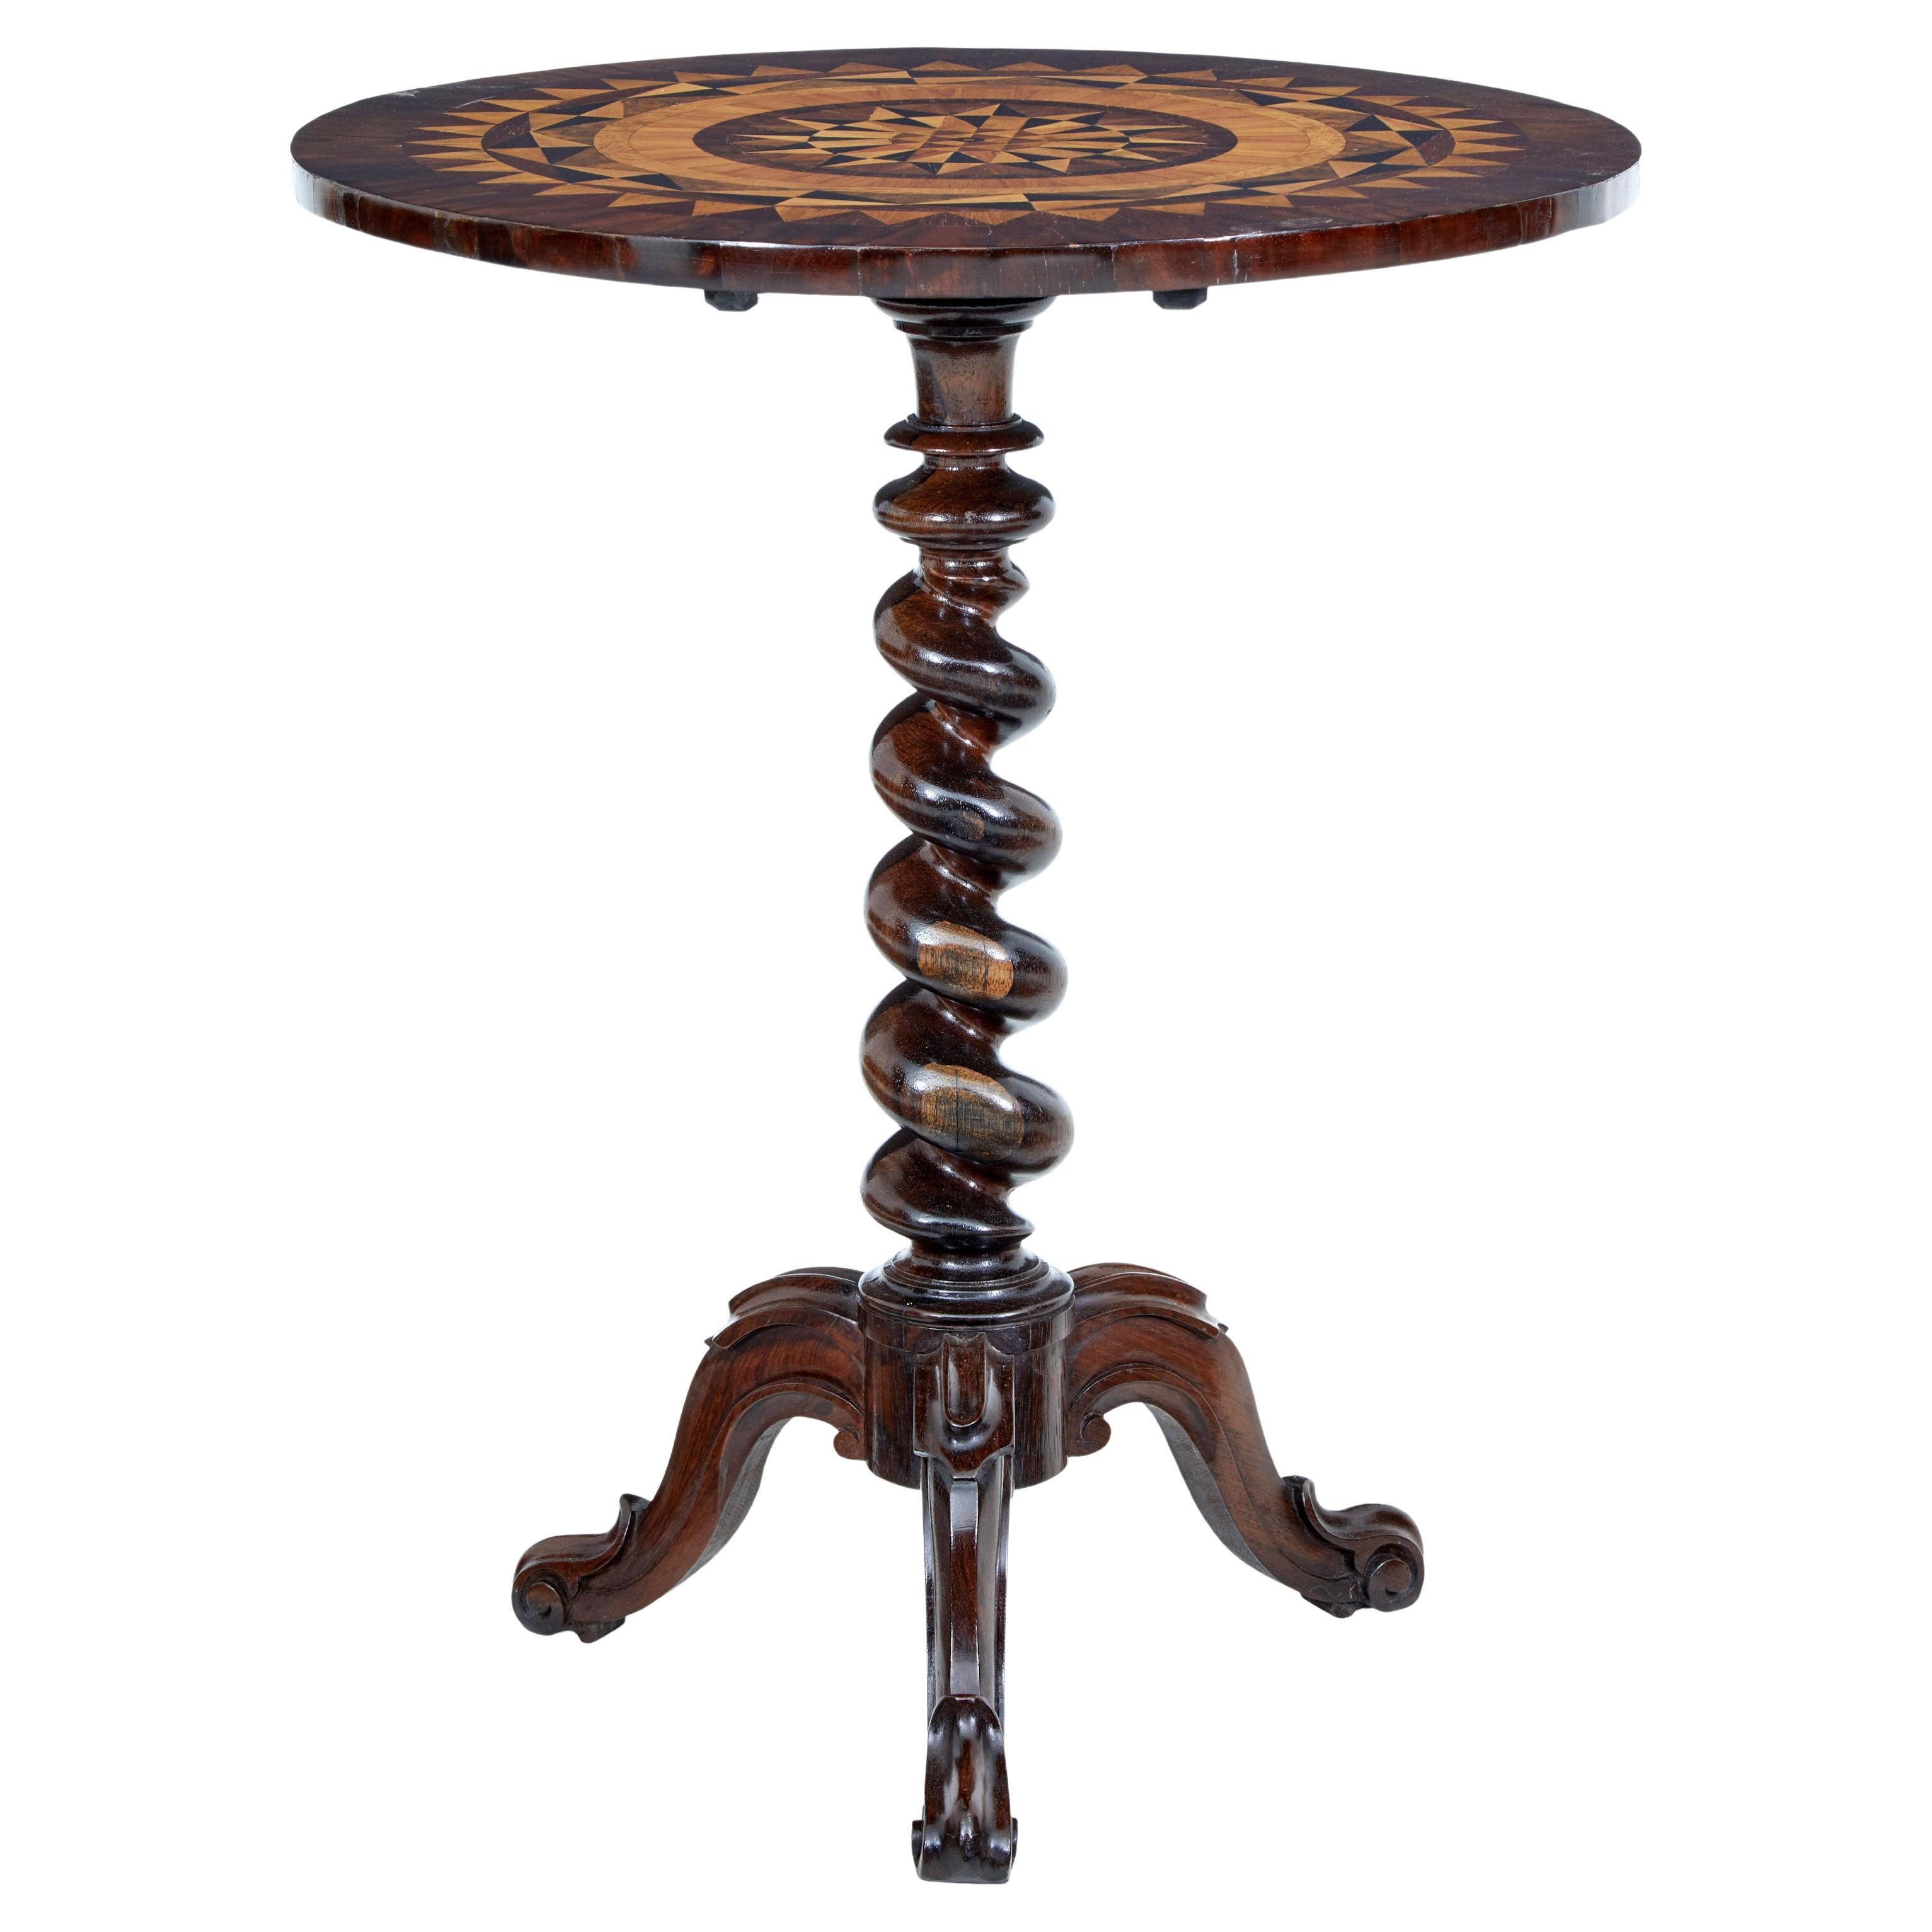 Early Victorian 19th Century Walnut Inlaid Tilt Top Occasional Table